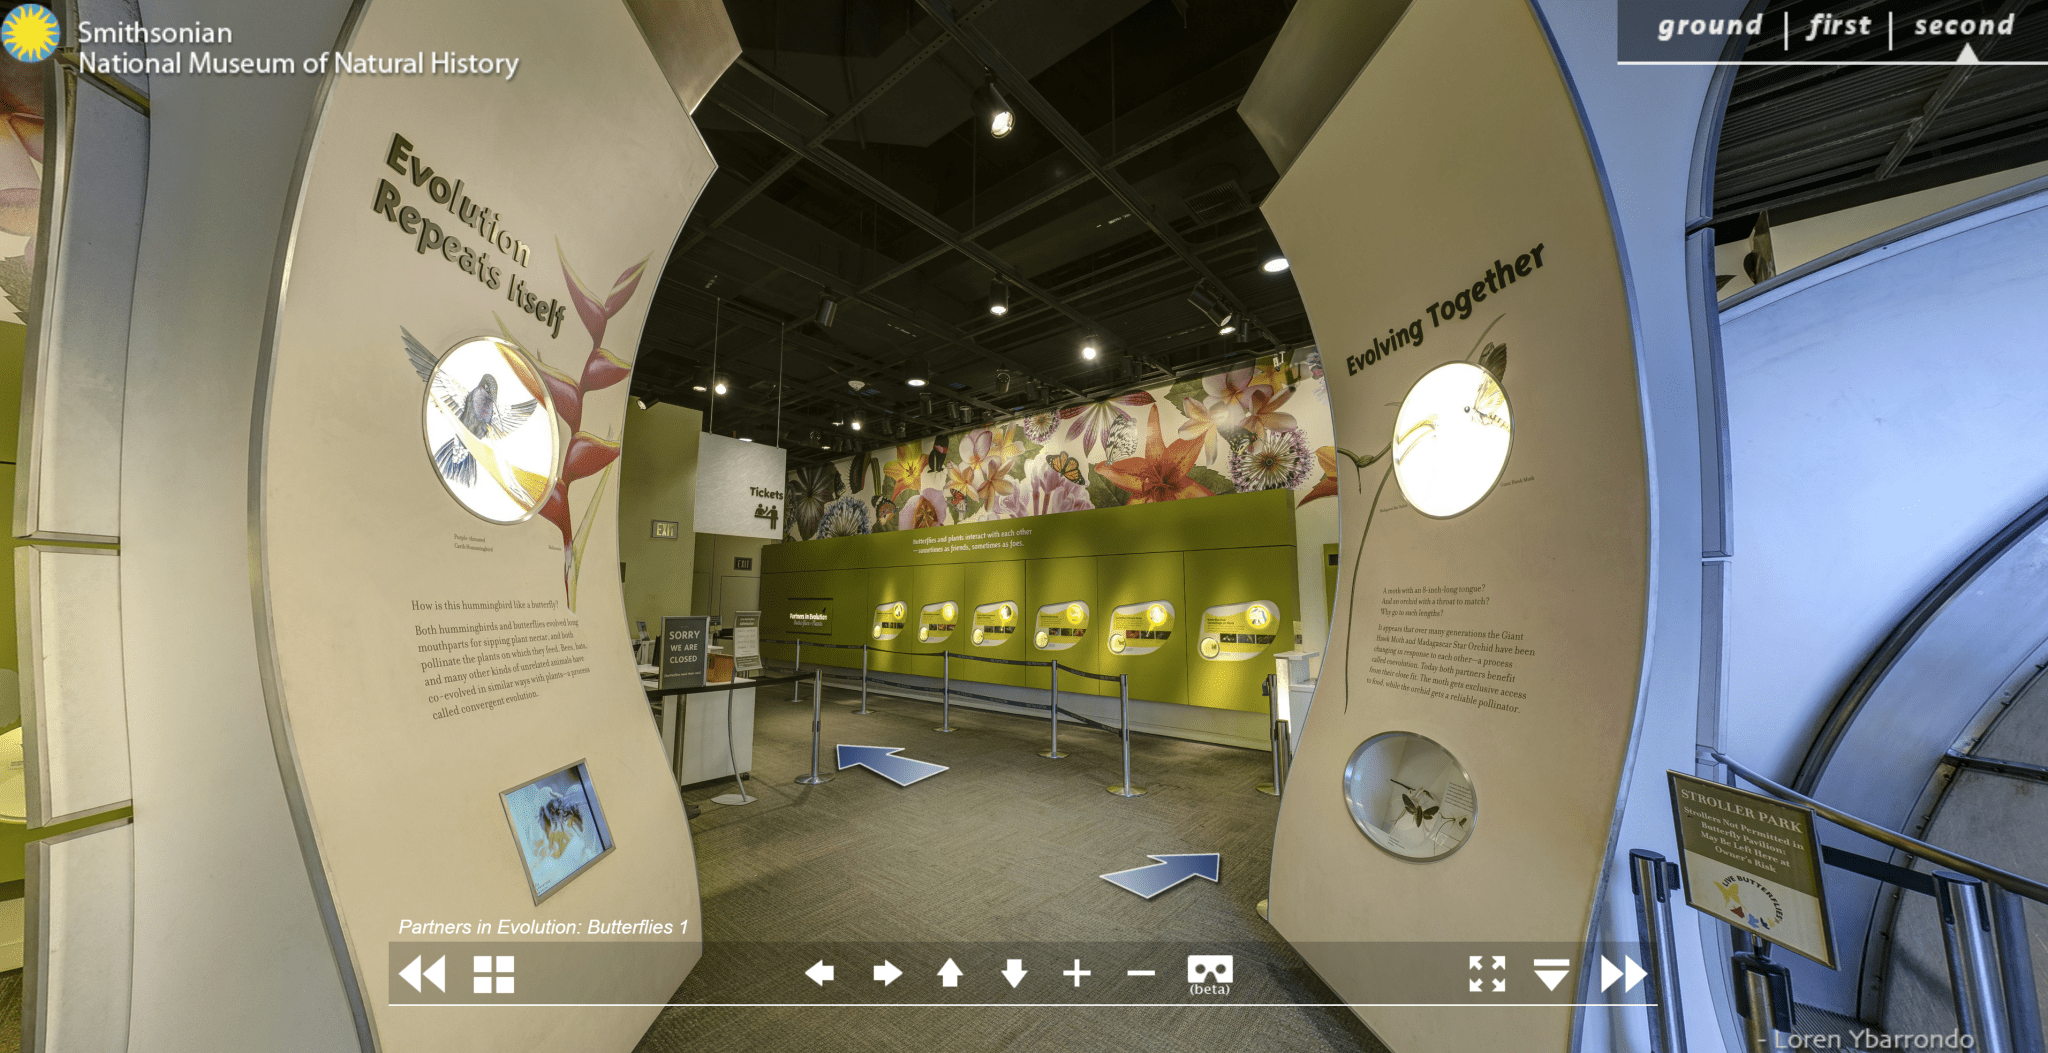 Screenshot of the virtual butterfly exhibit at the Smithsonian National Museum of Natural History